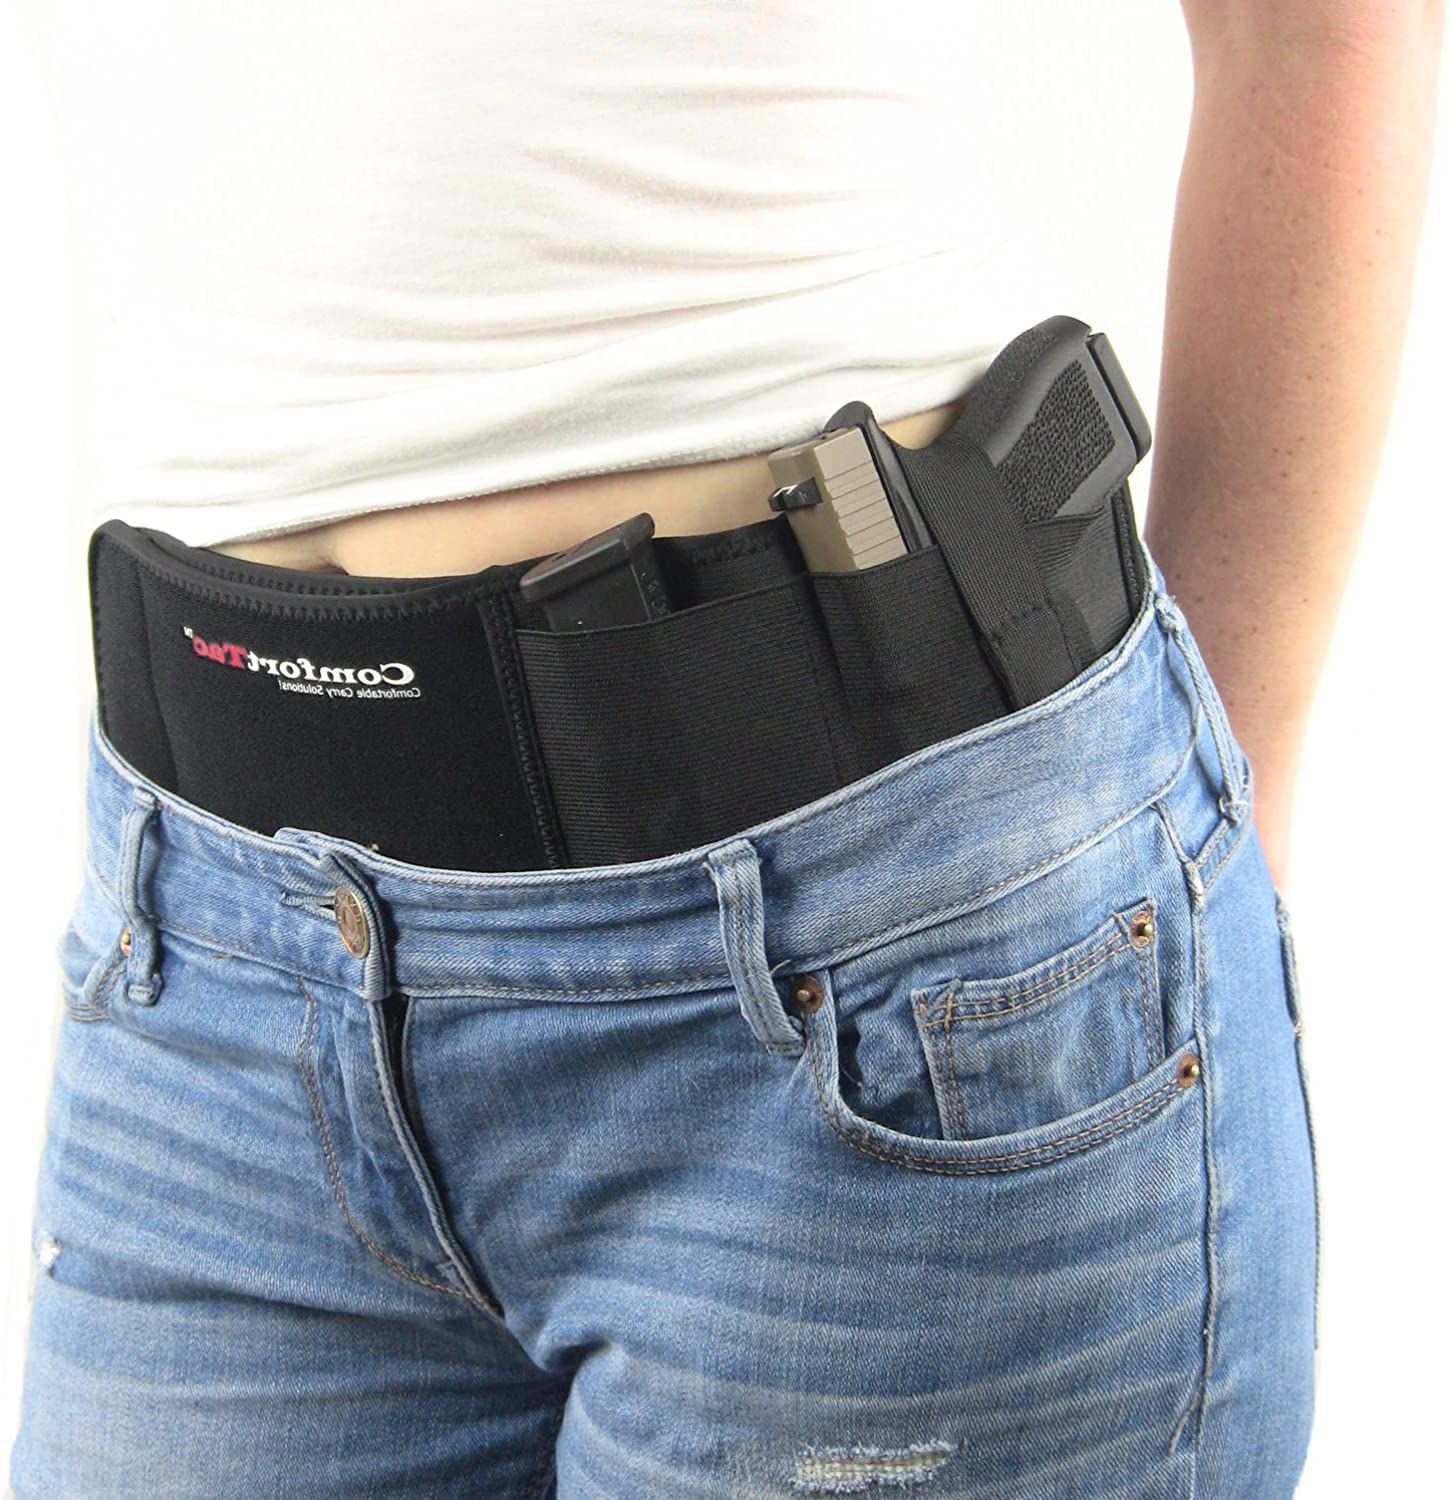 10 Best Concealed Carry Holsters of 2020 — ReviewThis